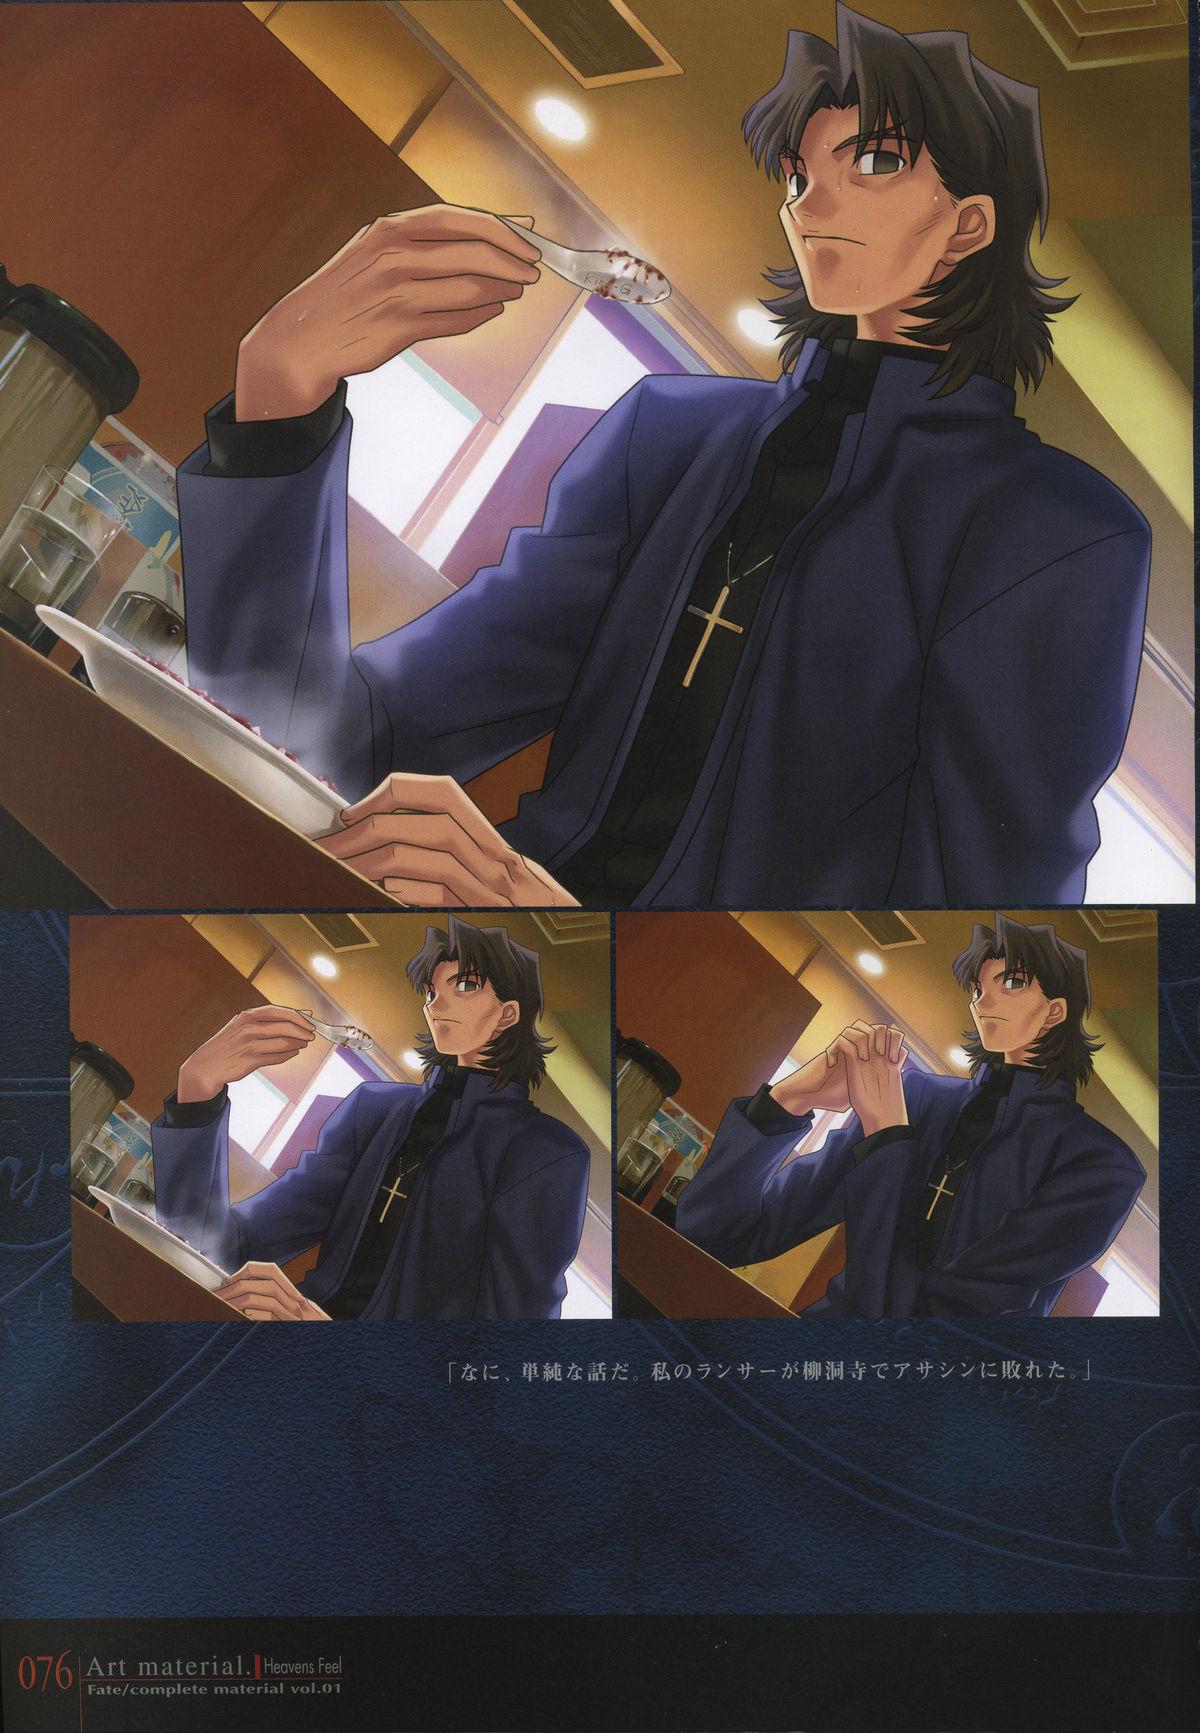 Fate/complete material I - Art material. 80